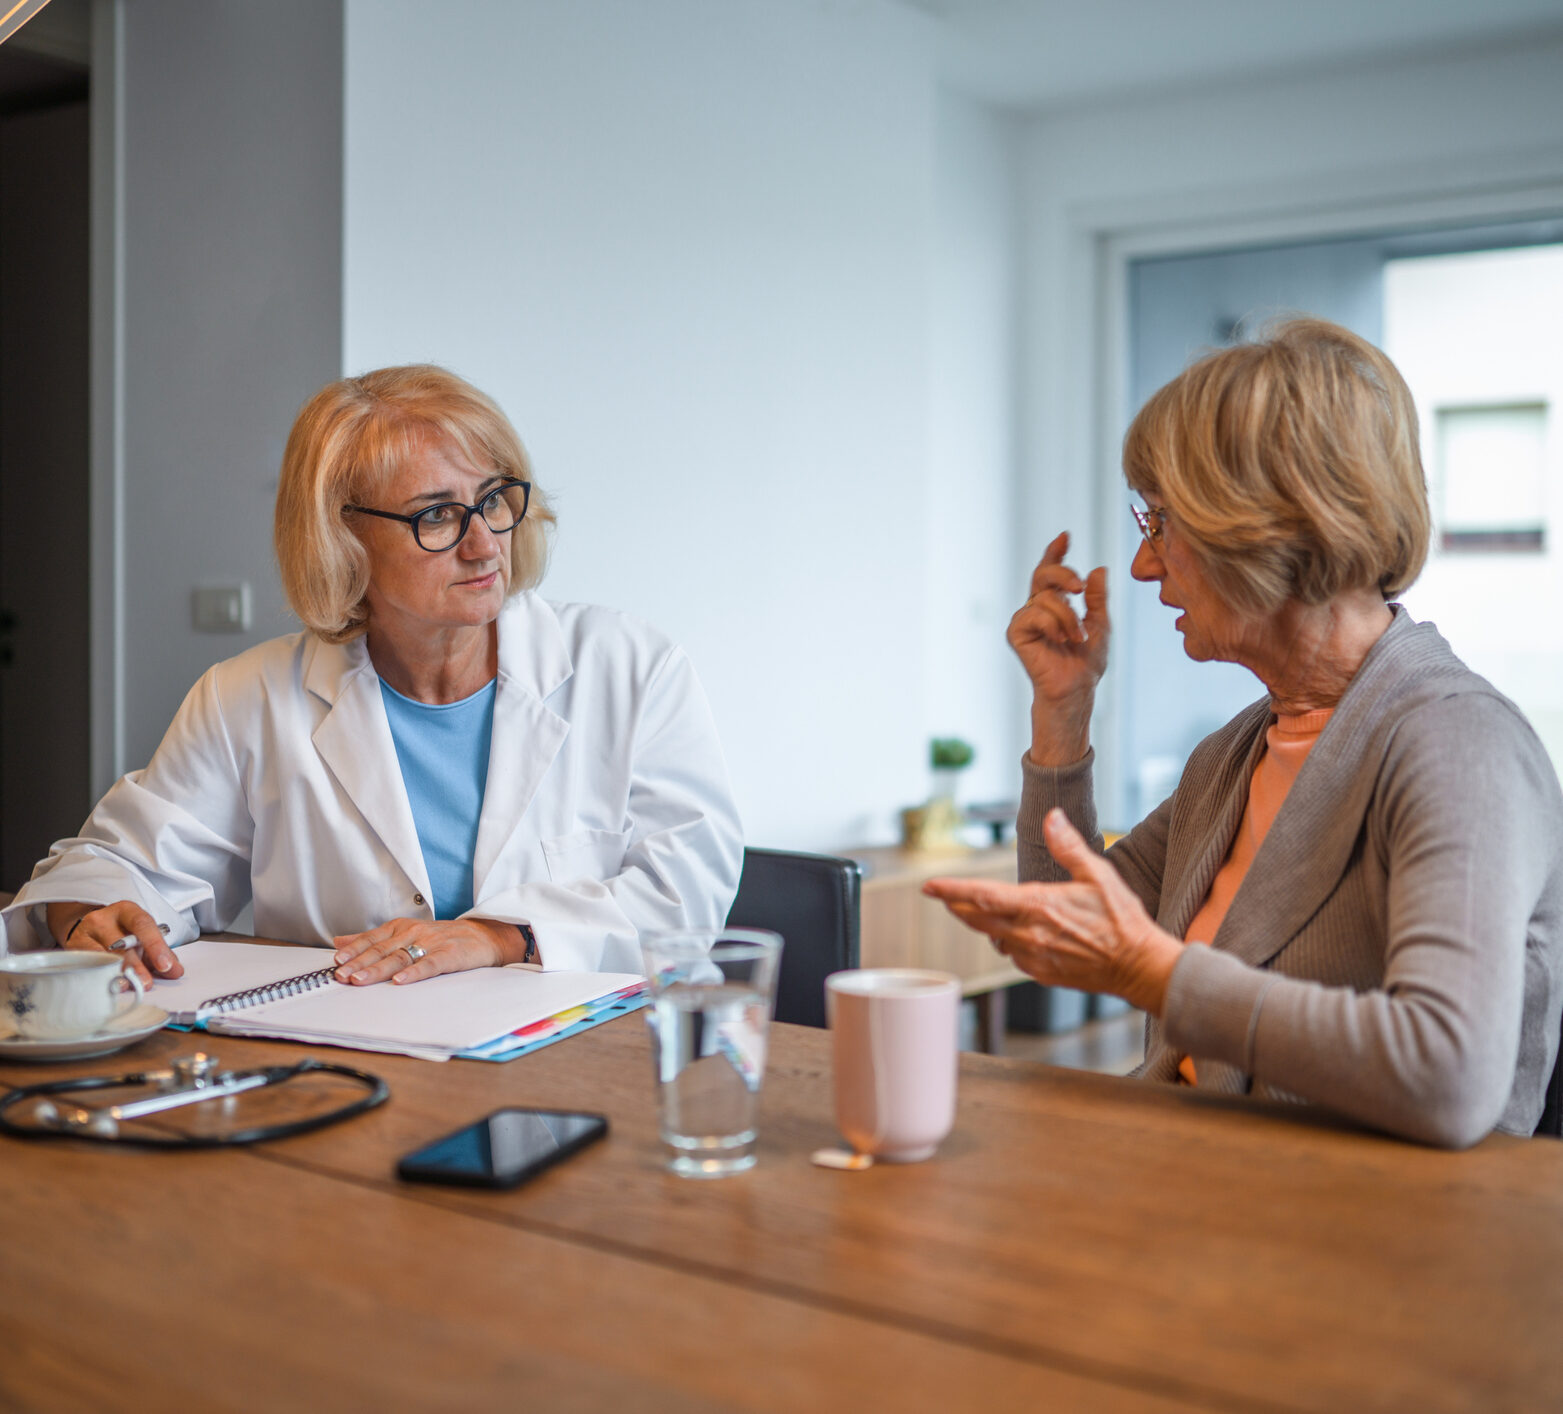 Blonde woman doctor talks to patient with diabetes, a blonde woman with glasses, about time in range